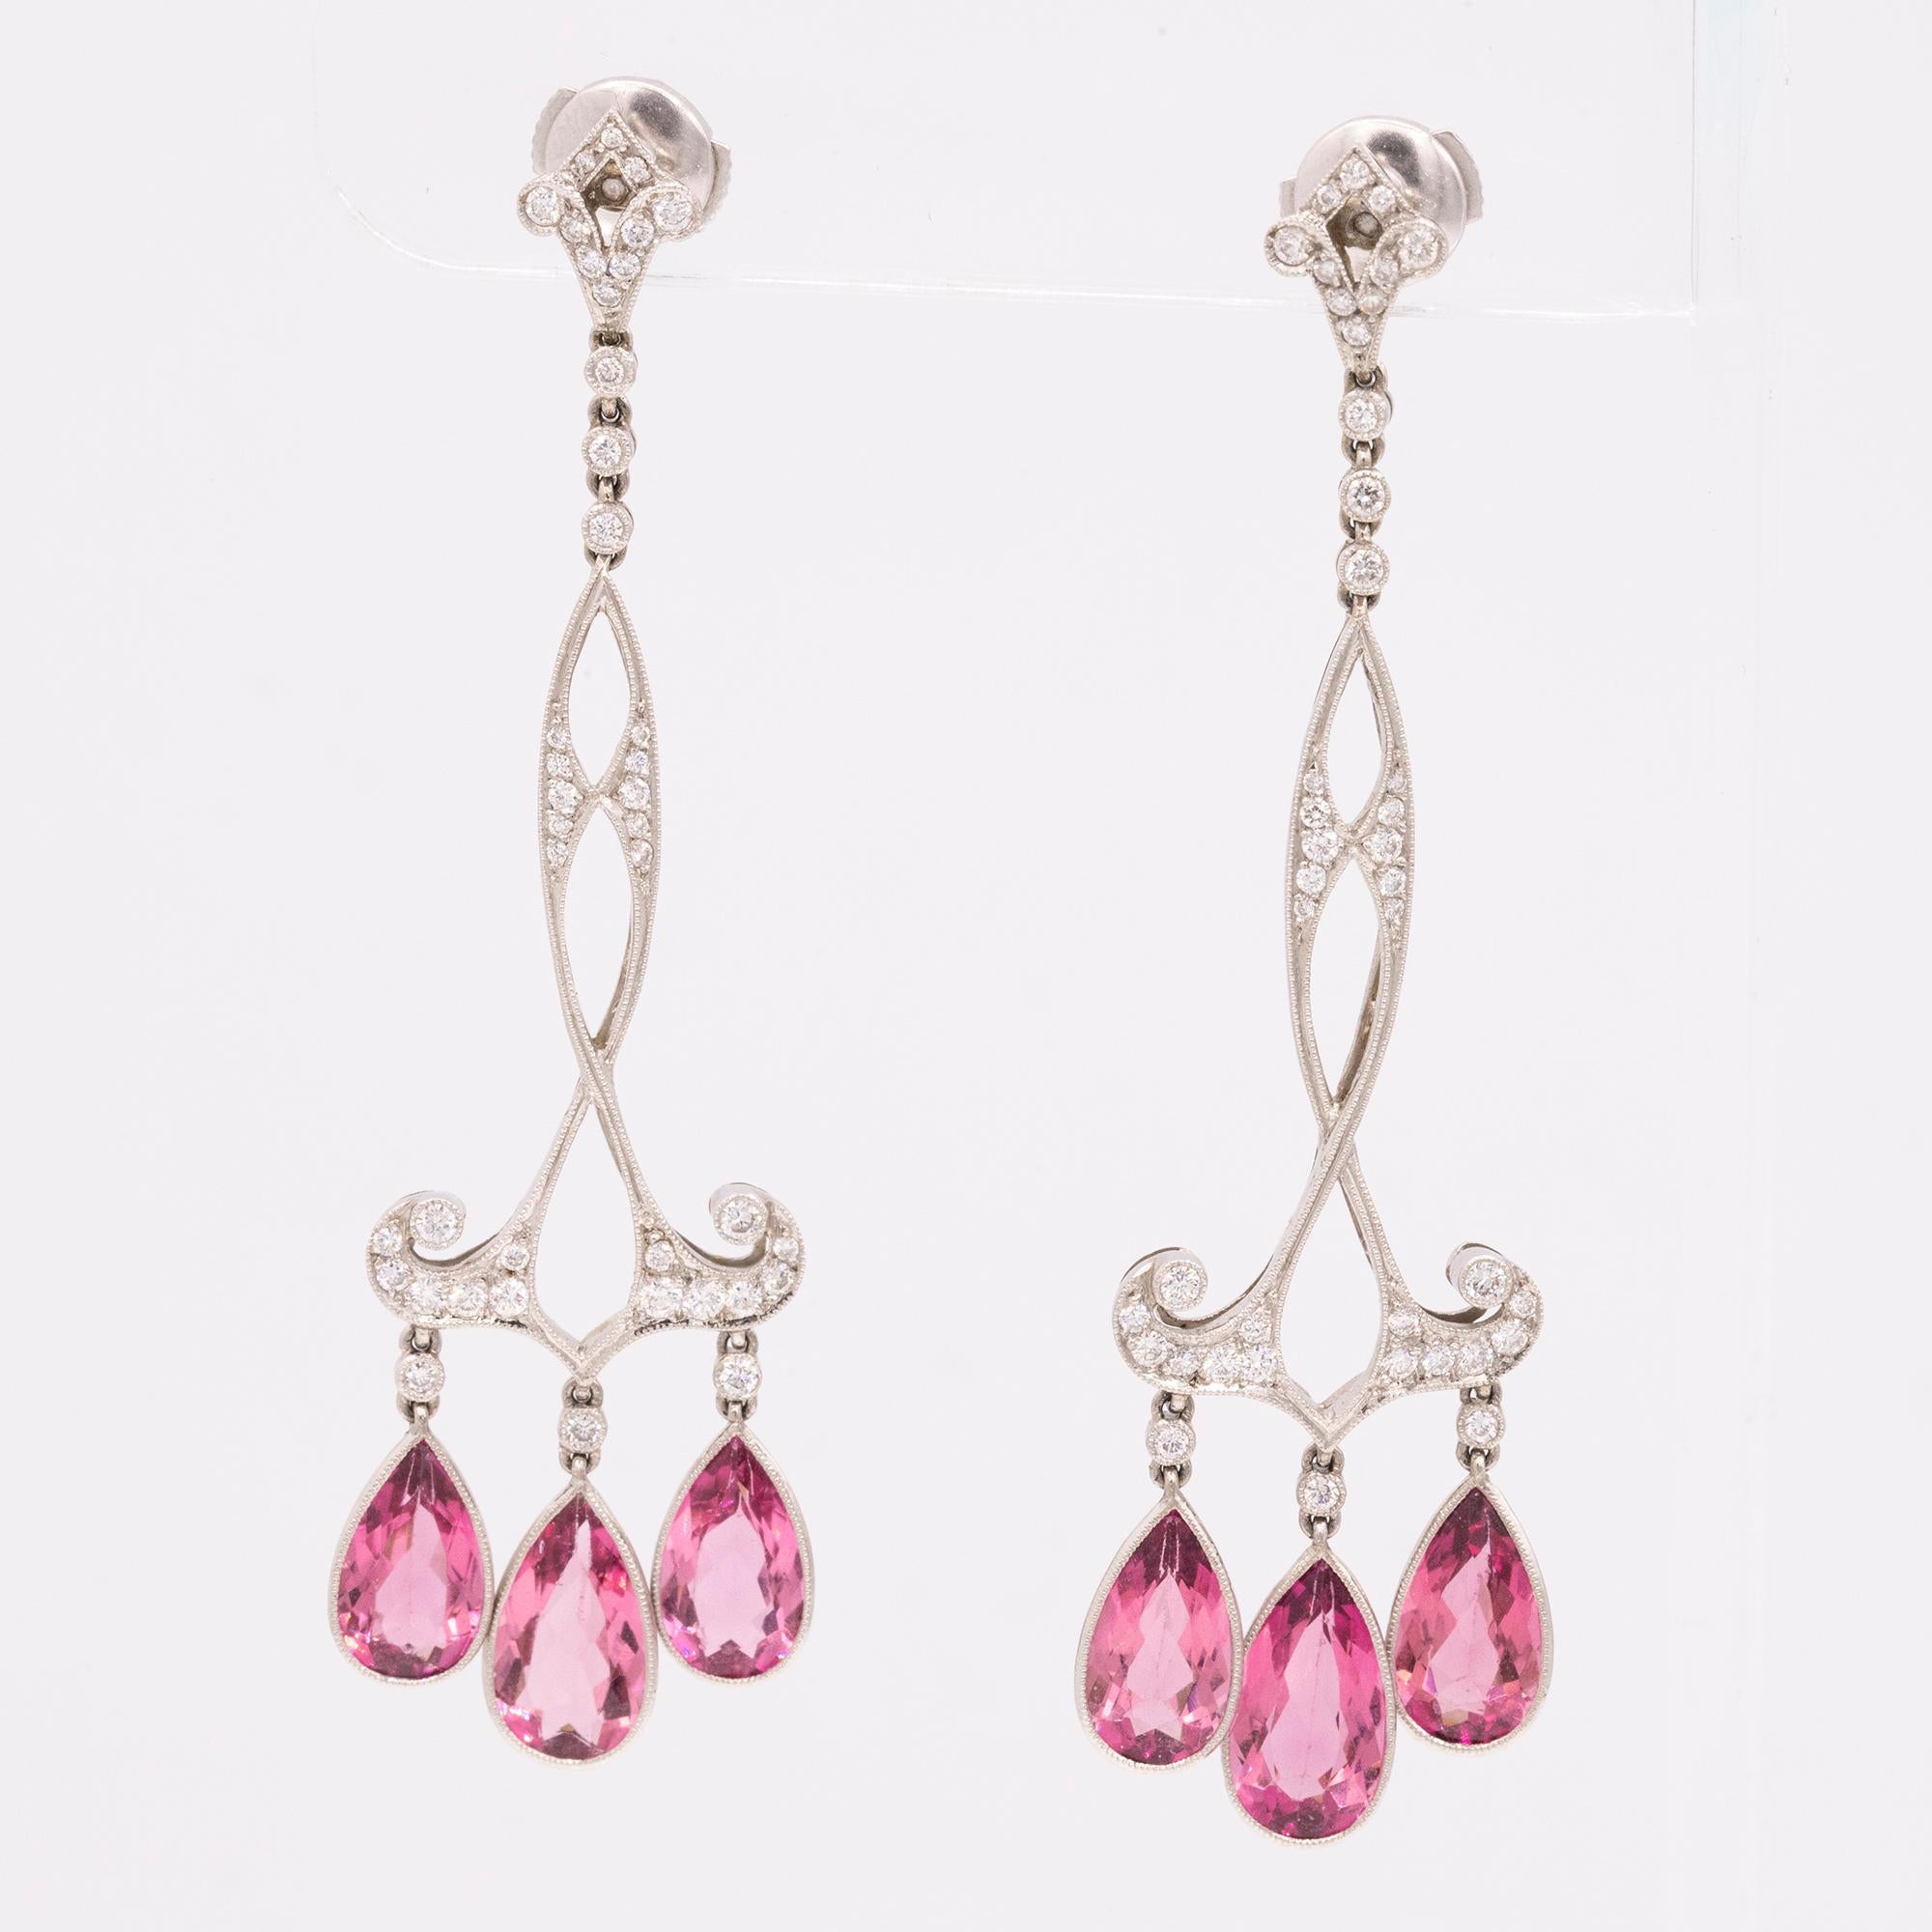 Tourmalines come in a wide variety of exciting colors. In fact, tourmaline has one of the widest color ranges of any gem species, occurring in various shades of virtually every hue.

Handwrought in precious platinum, these striking earrings